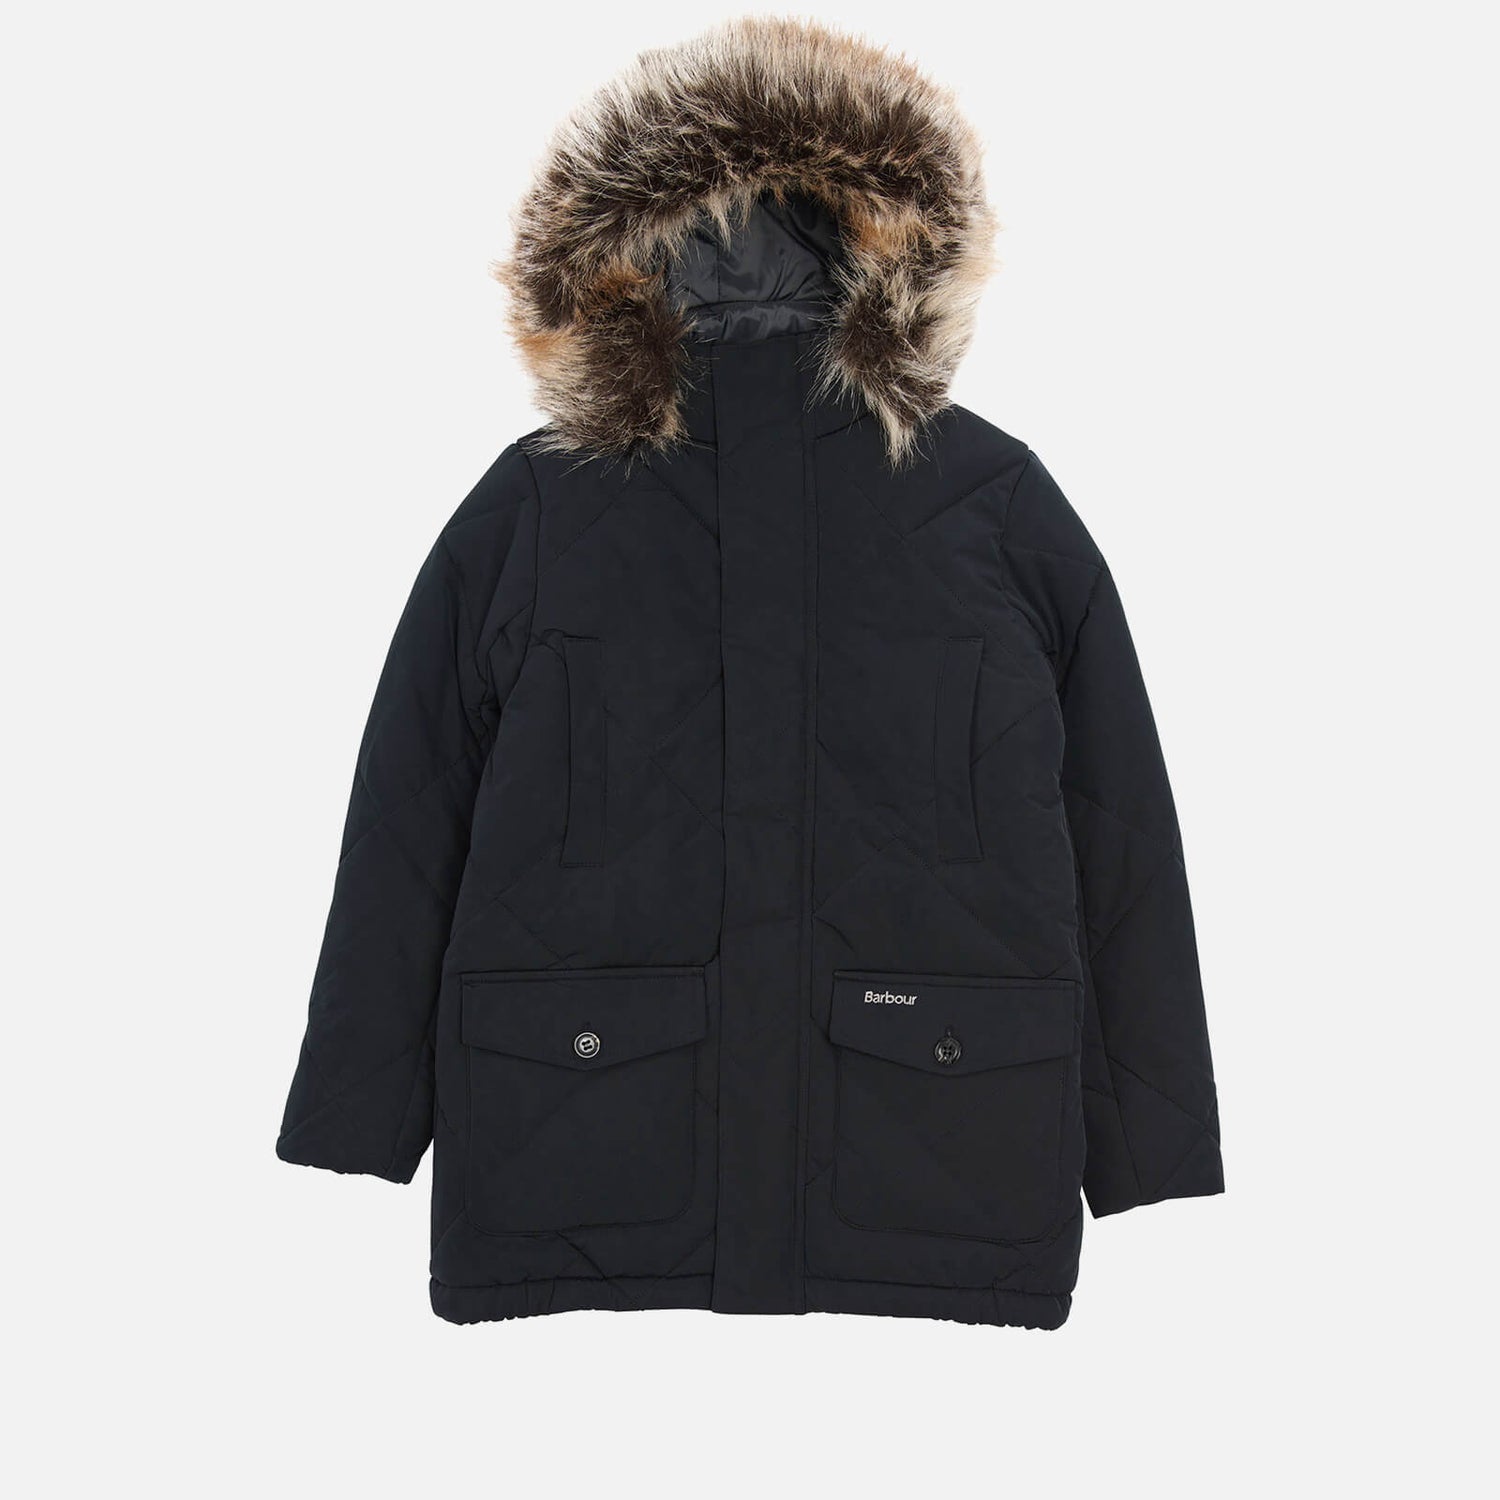 Barbour Dalbigh Hooded Shell Parka - S (6-7 Years)